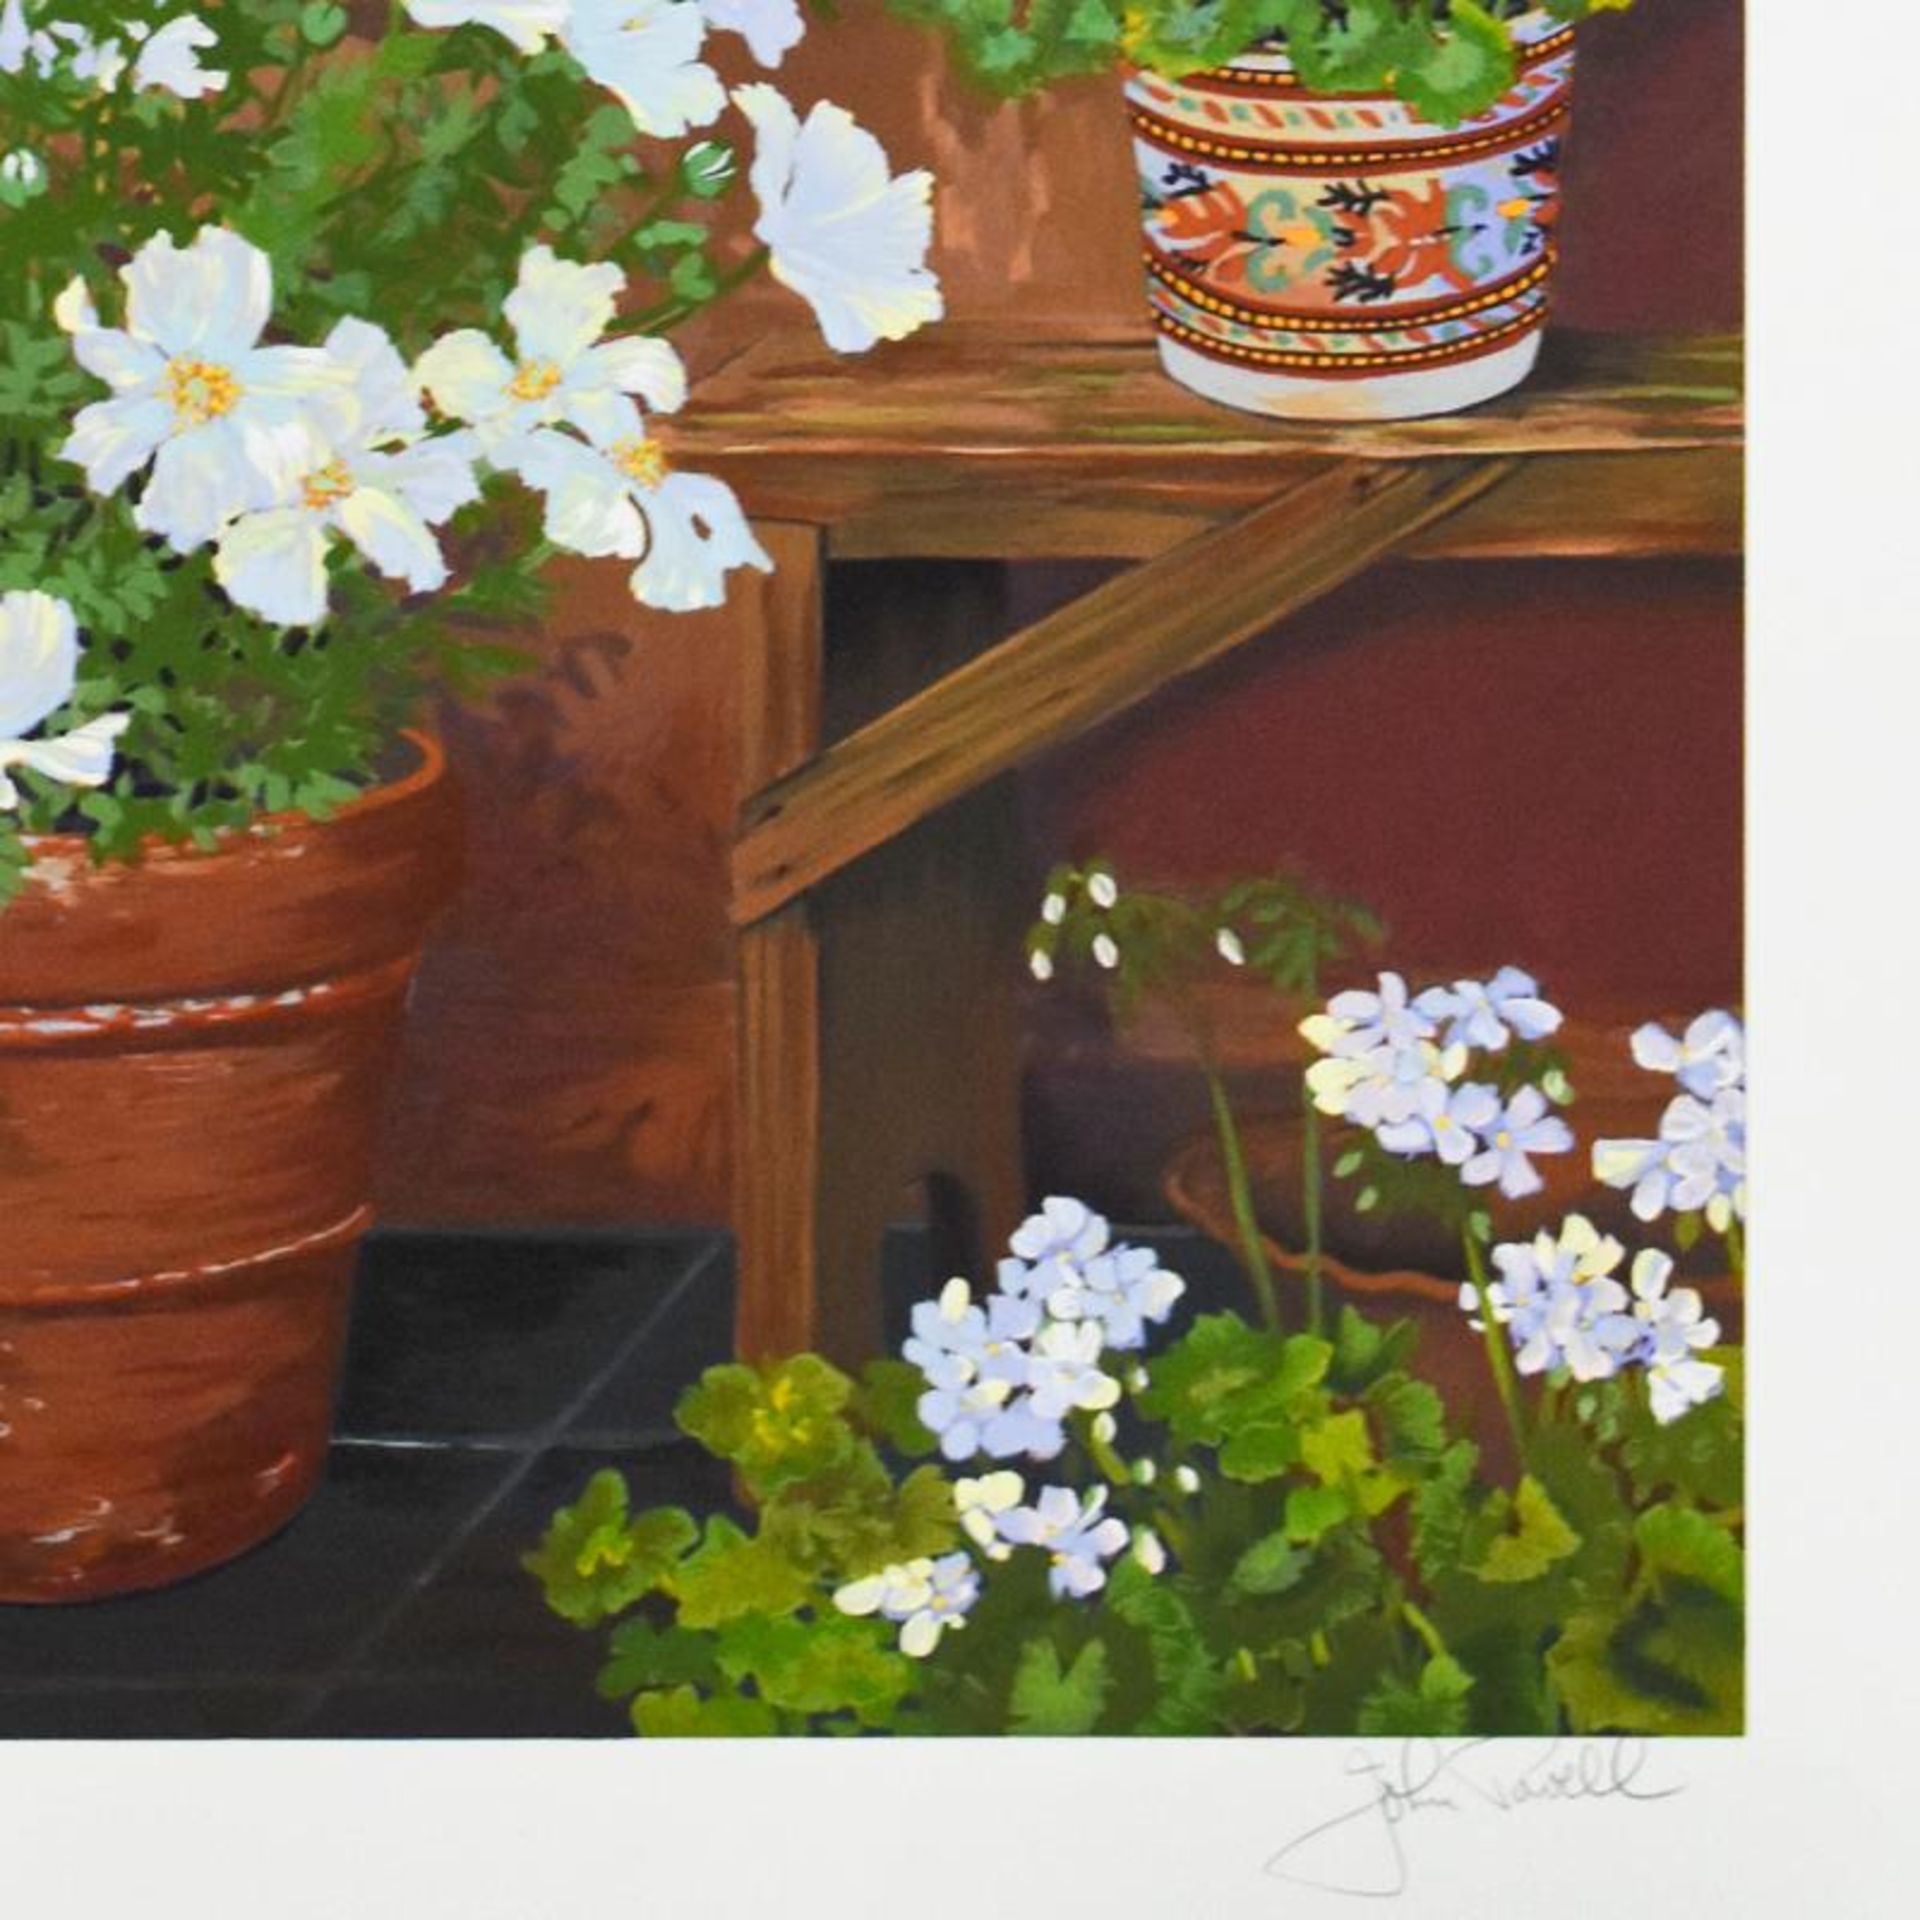 Geraniums by Powell, John - Image 2 of 2